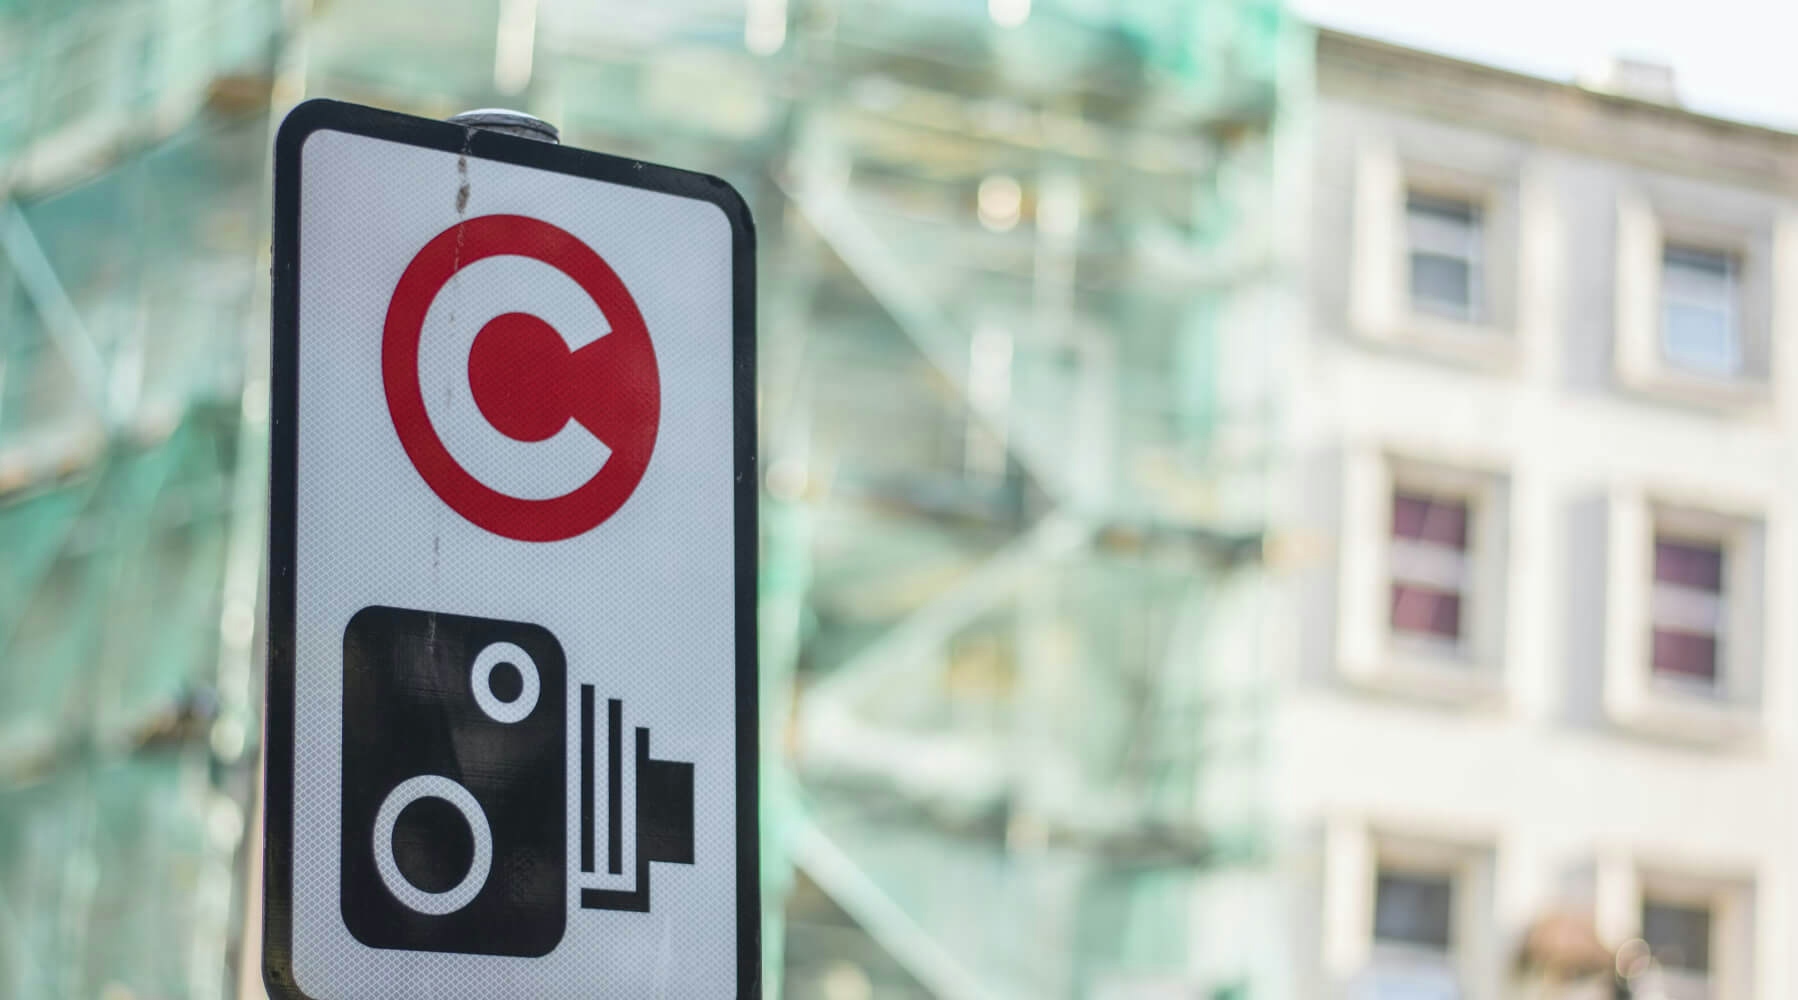 road sign showing London Congestion charge boundary